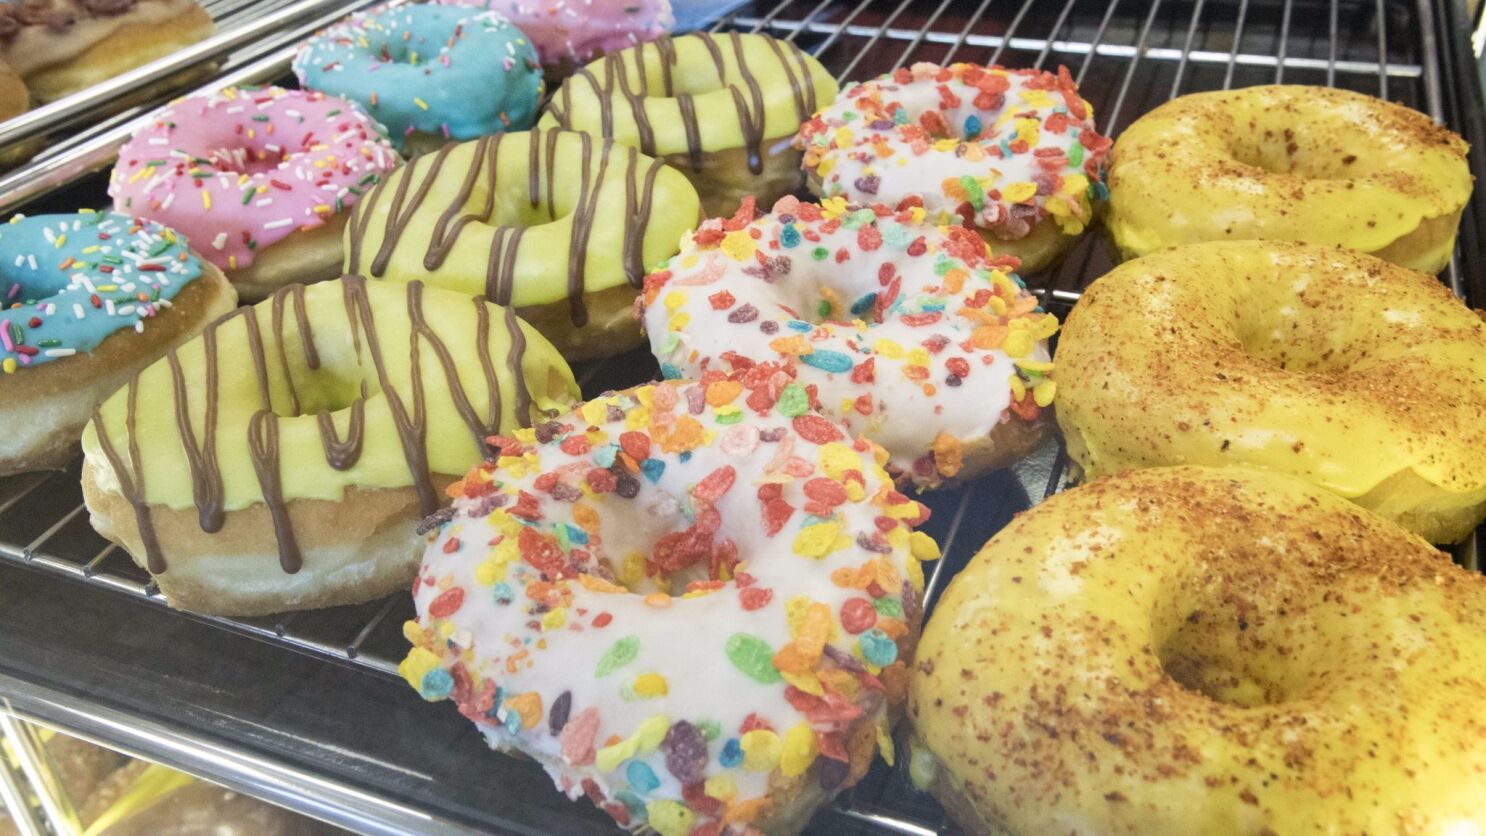 The definitive guide to Los Angeles doughnut shops - Los Angeles Times